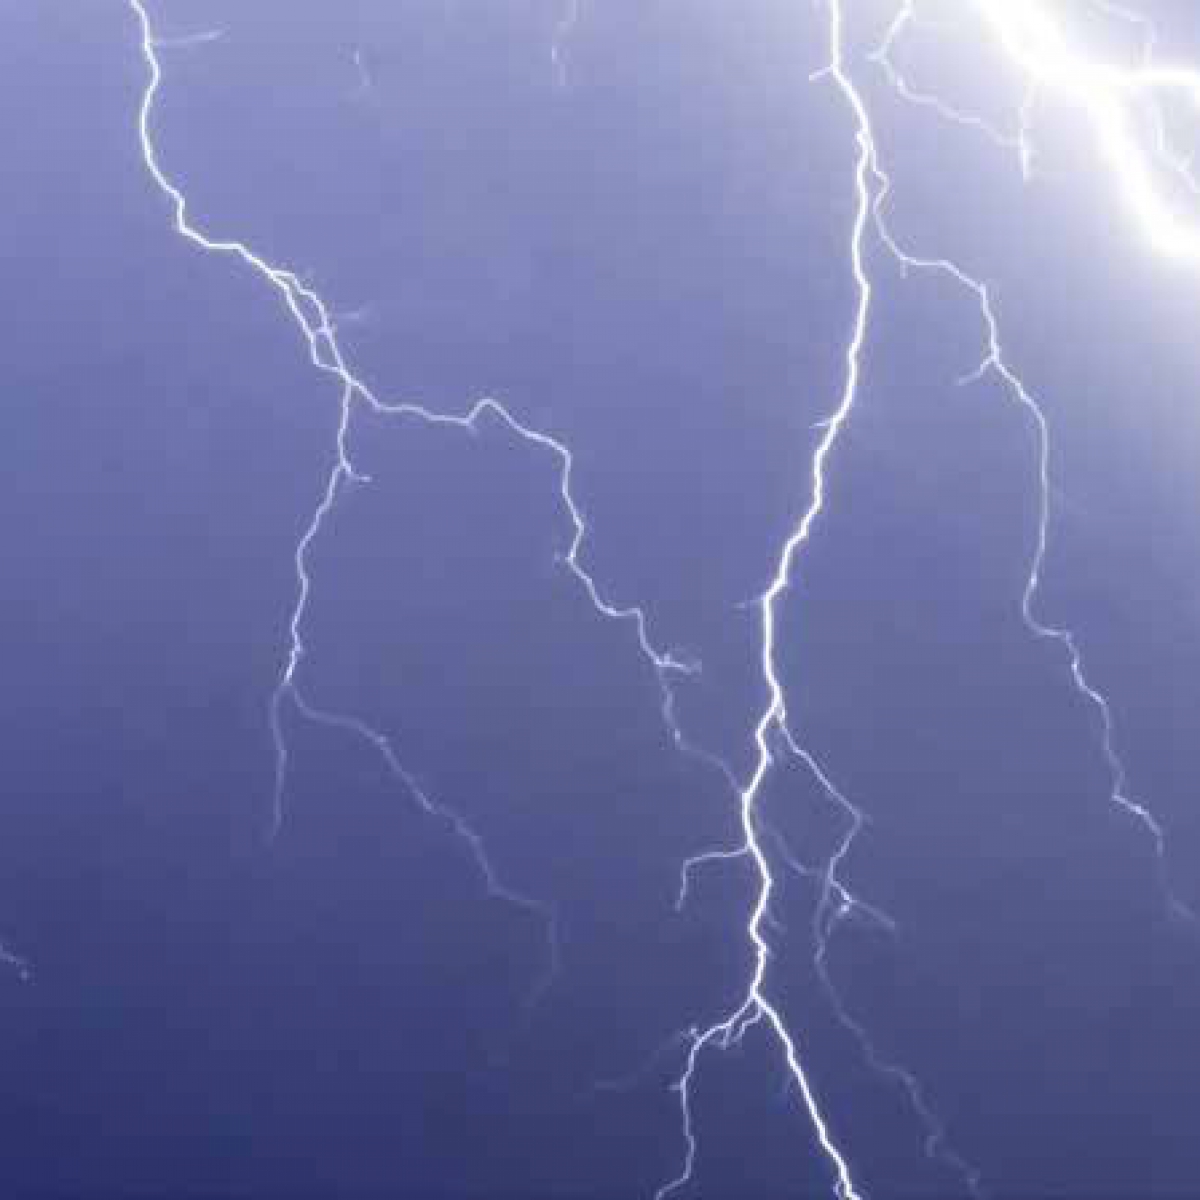 ELECTRICAL SAFETY FAQ FOR SEVERE WEATHER